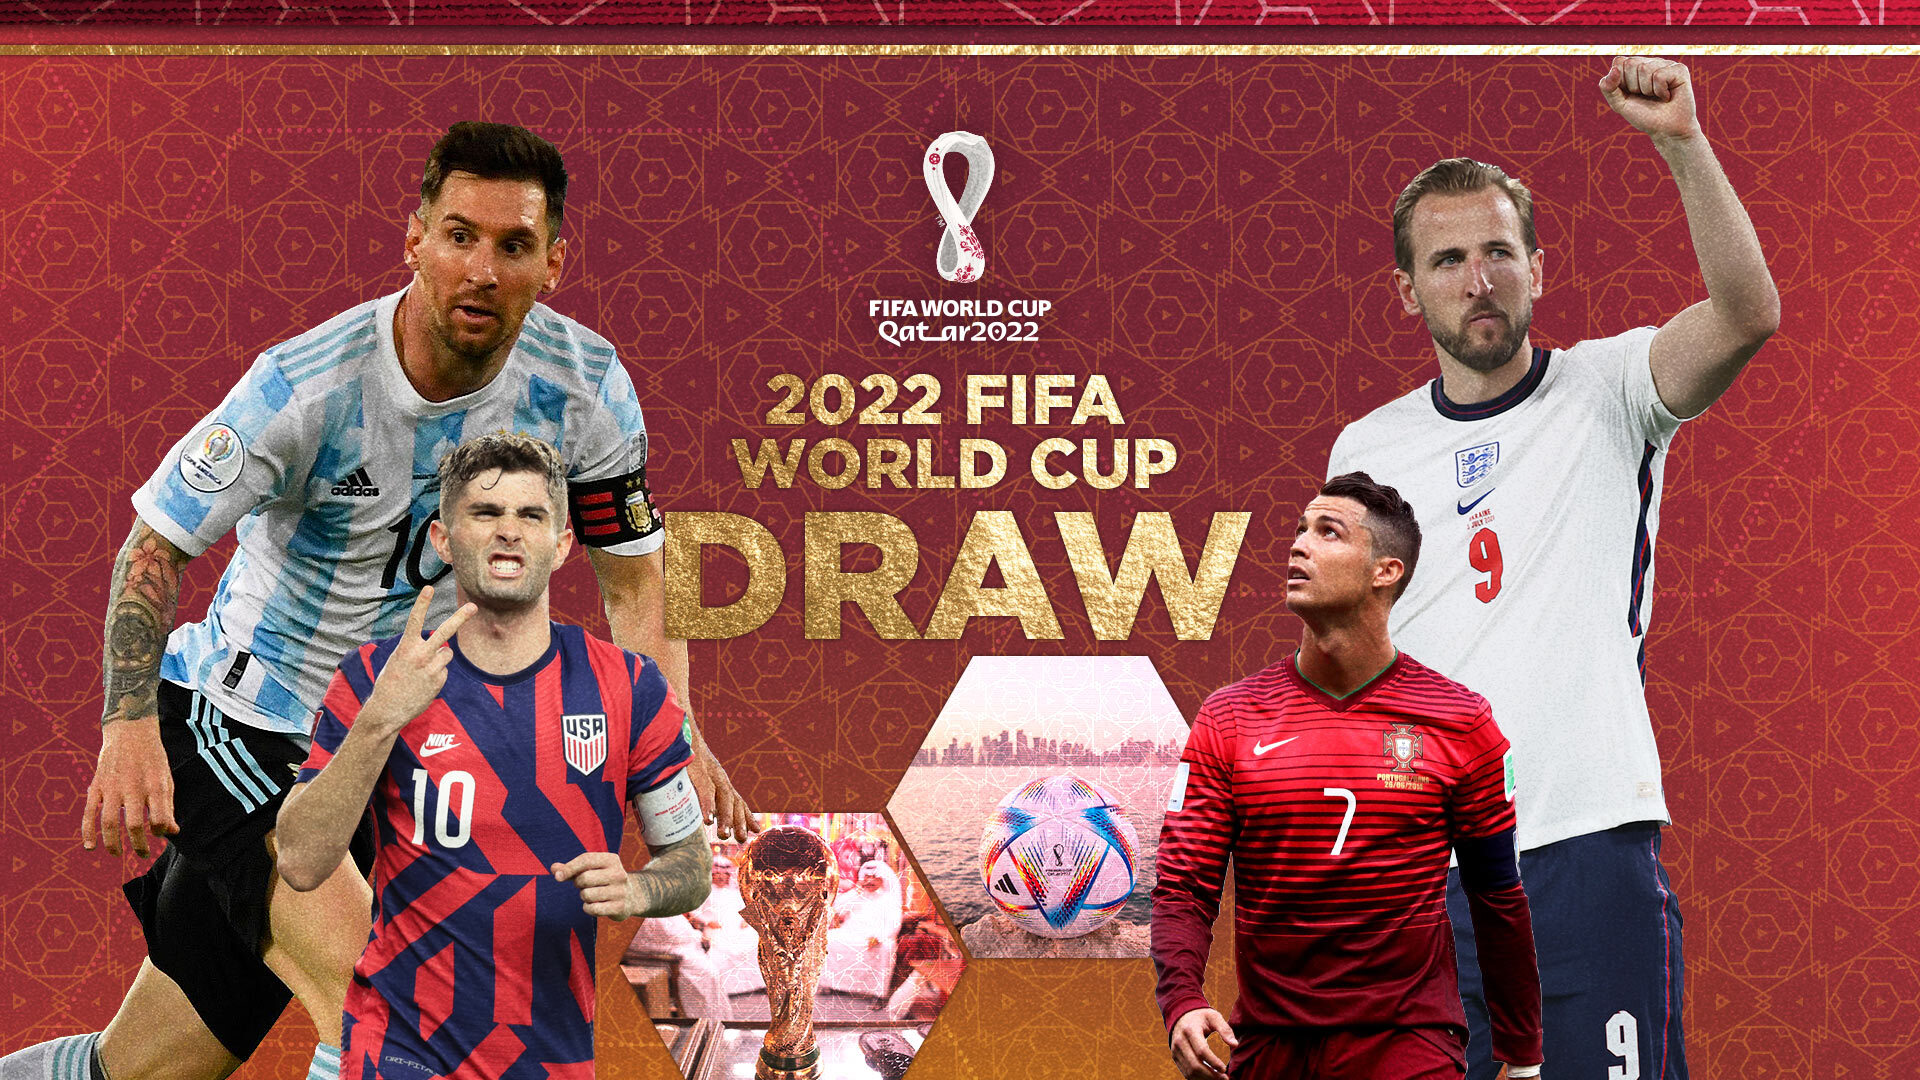 2022 FIFA Men's World Cup draw: The eight groups are set